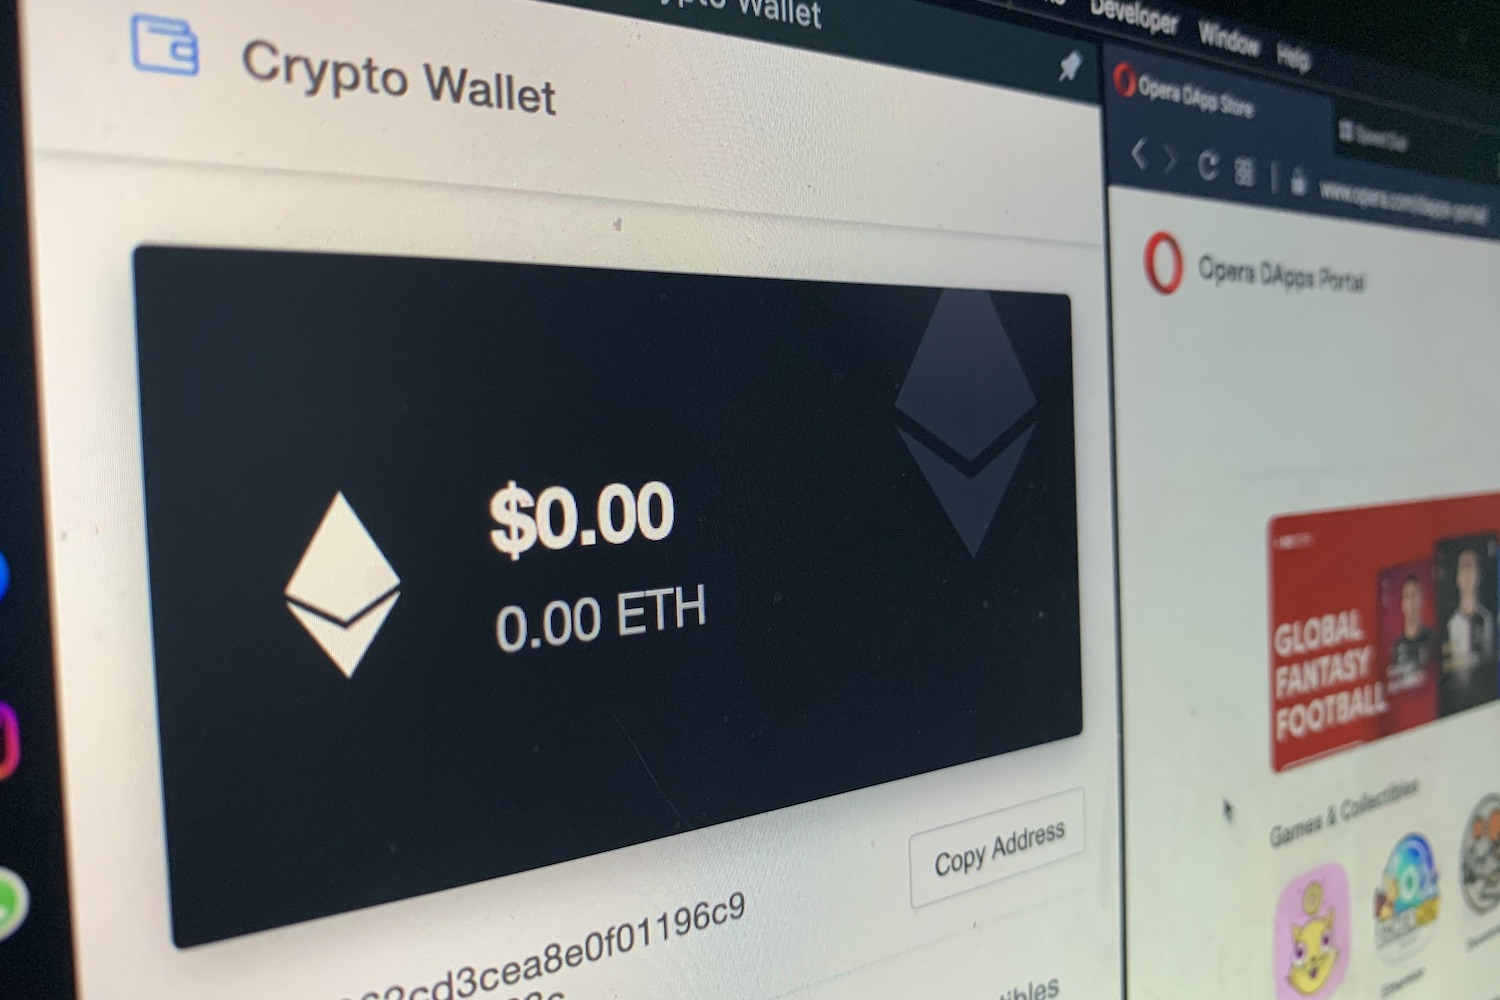 Opera’s-built-in-crypto-wallets-have-170k-monthly-active-users